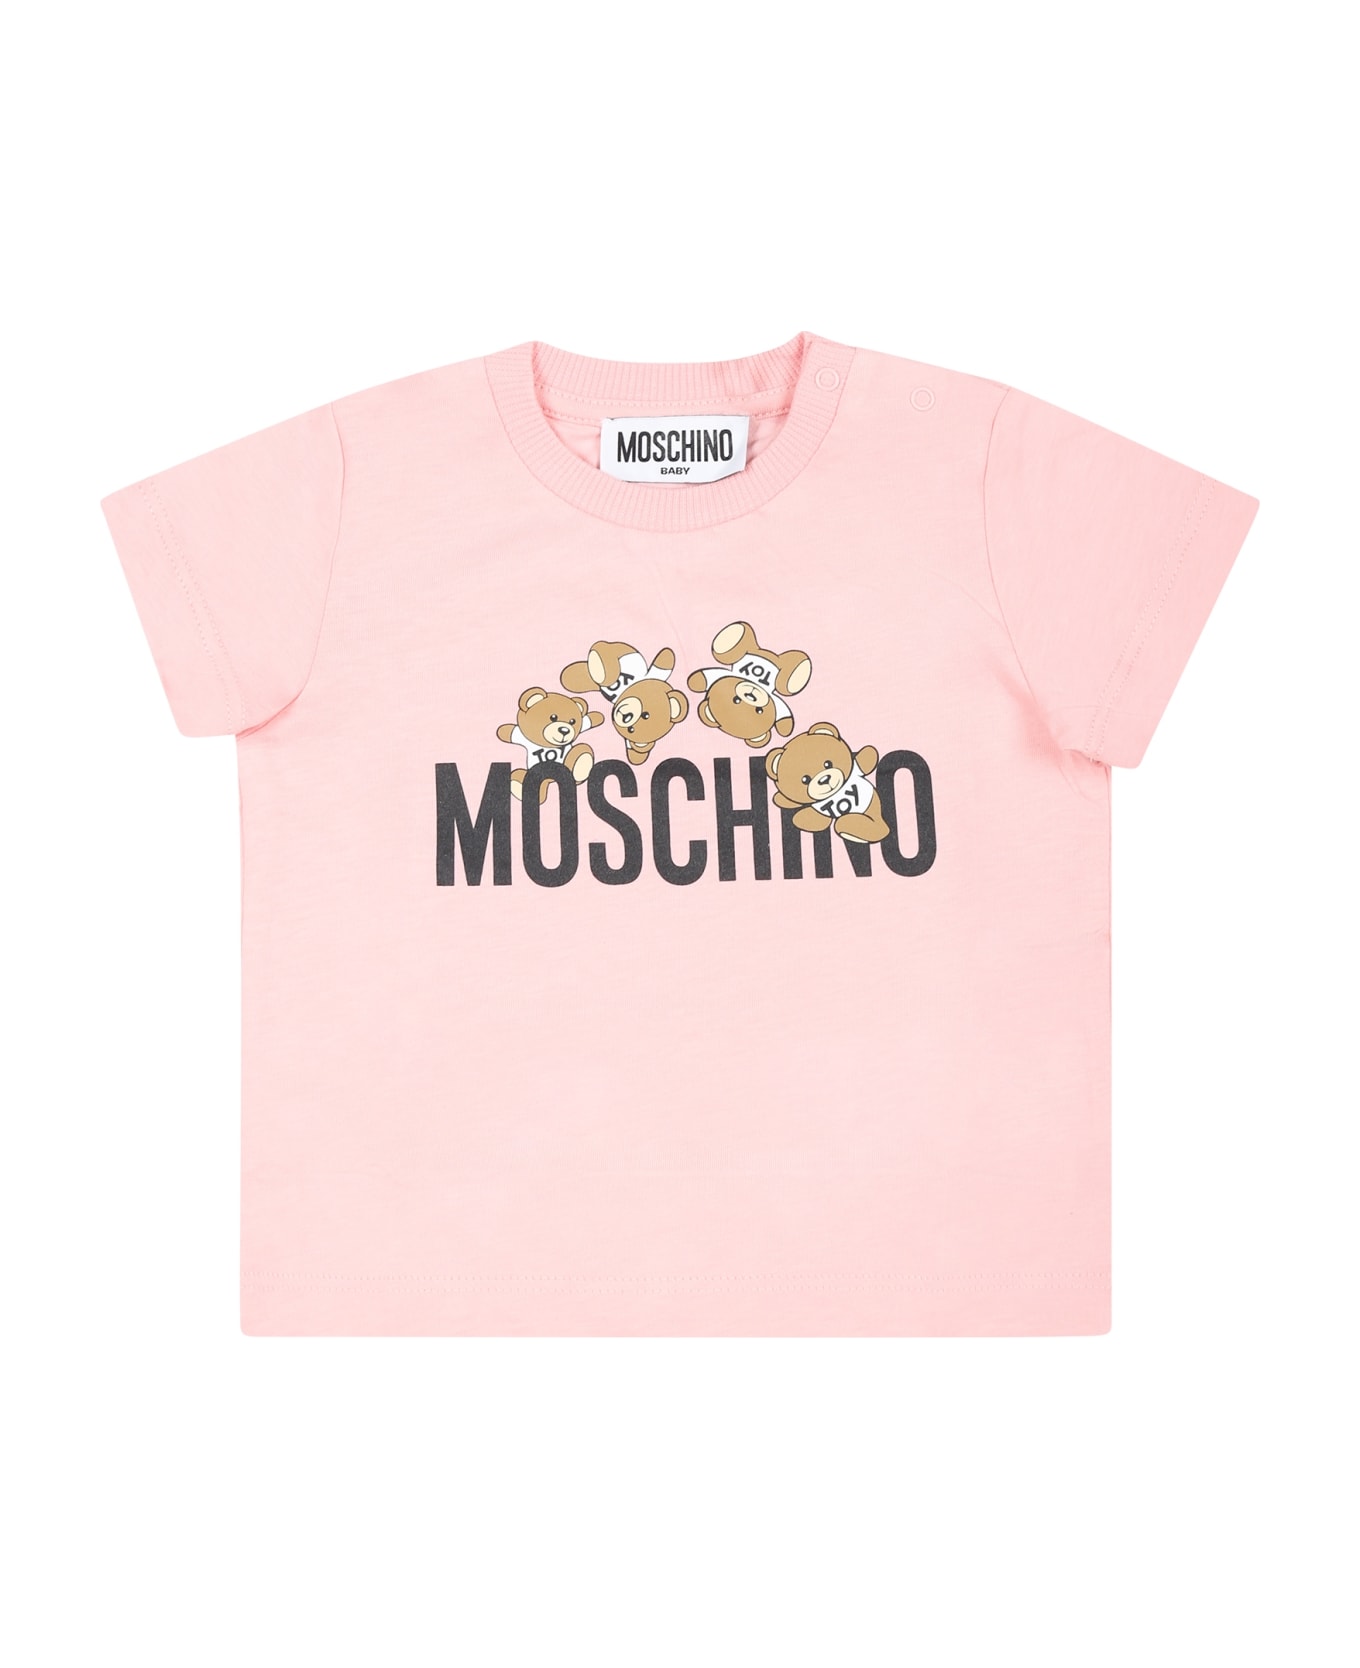 Moschino Pink T-shirt For Baby Girl With Teddy Bear - Pink